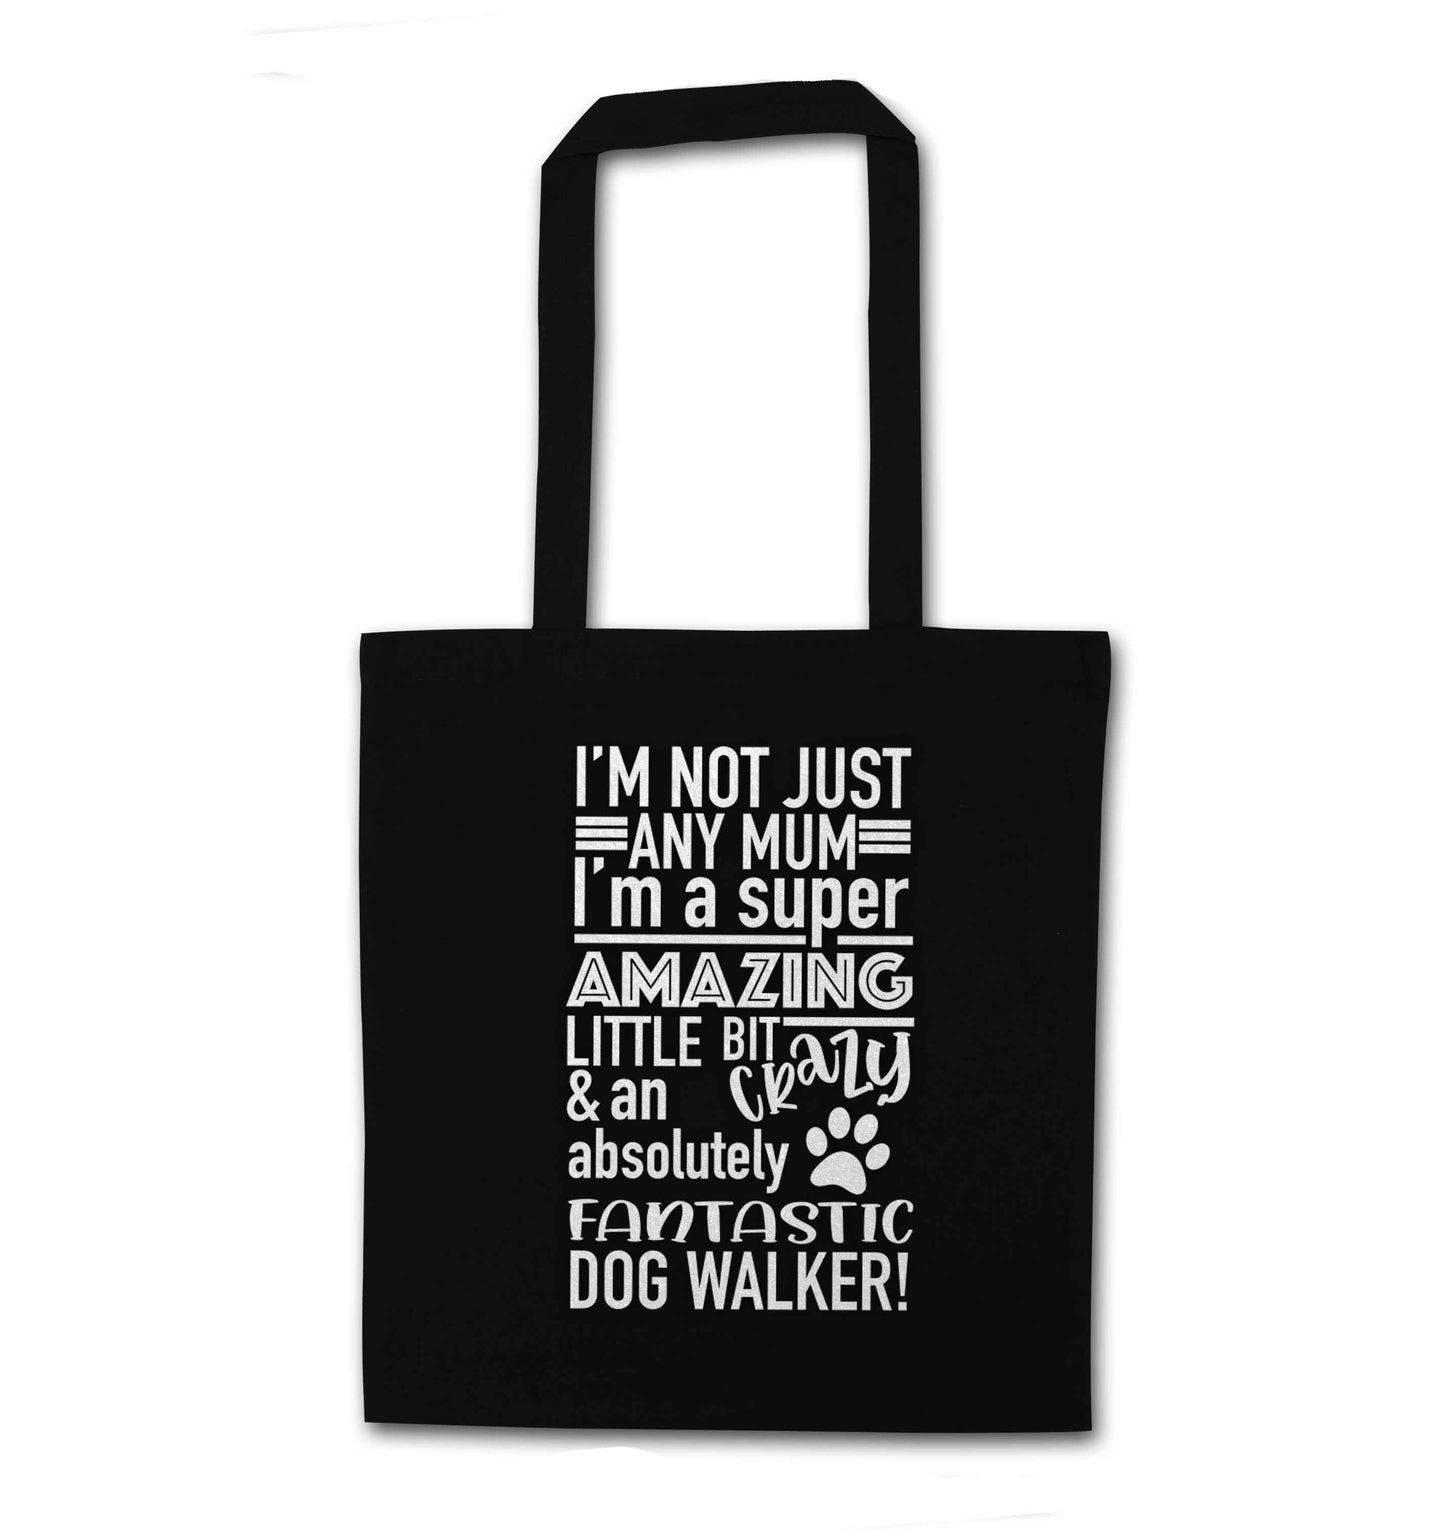 I'm not just any mum I'm a super amazing little bit crazy and an absolutely fantastic dog walker! black tote bag